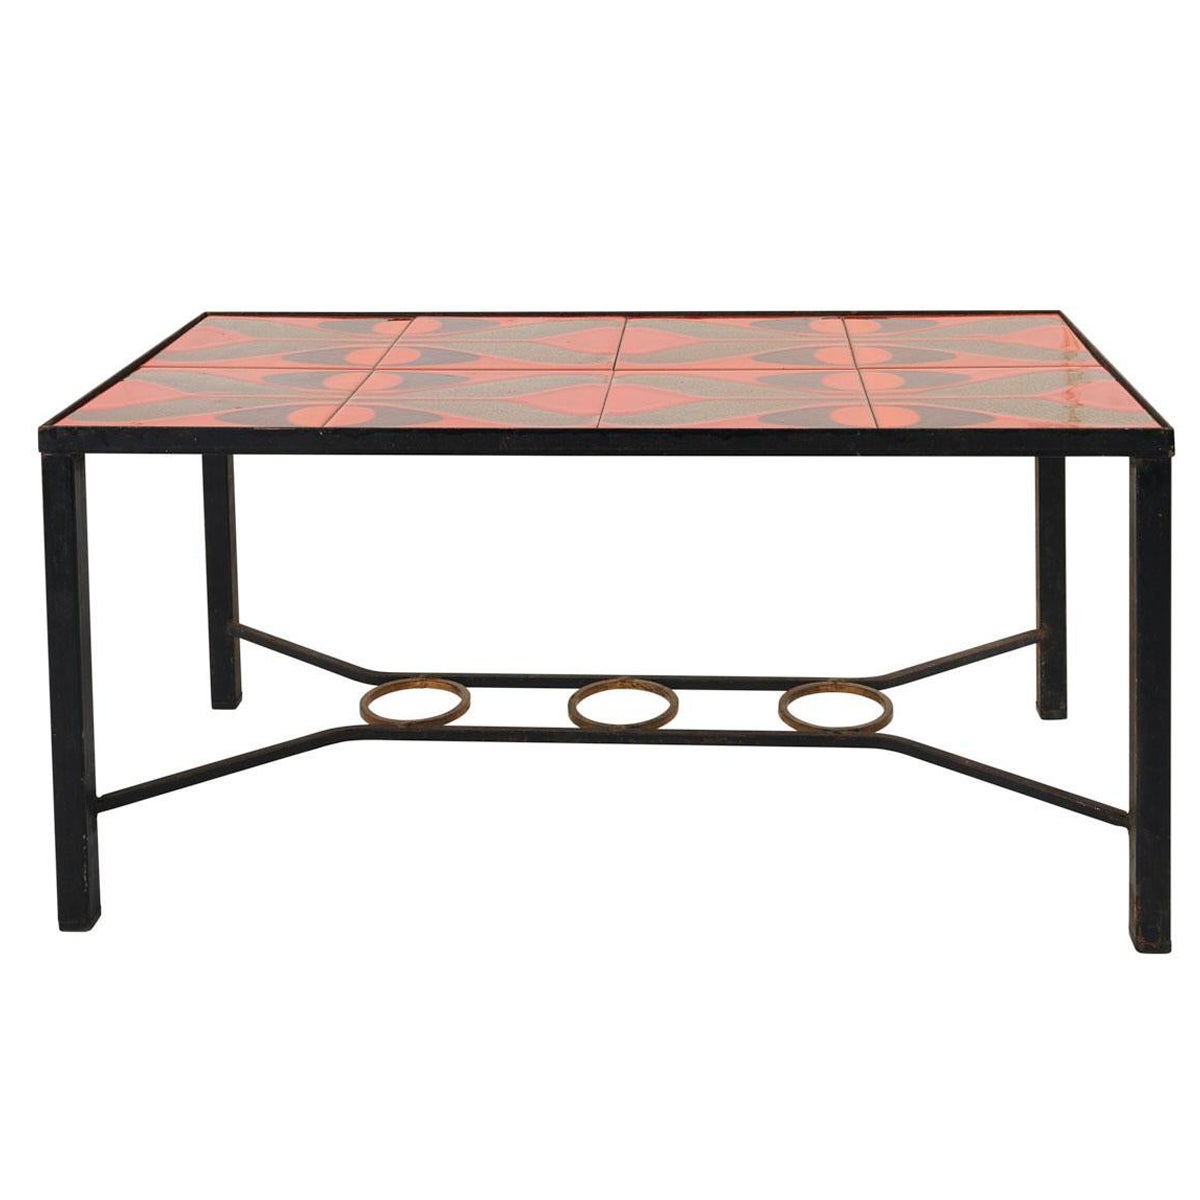 1960s Vallauris Iron Coffee Table with Red Tile Top, France